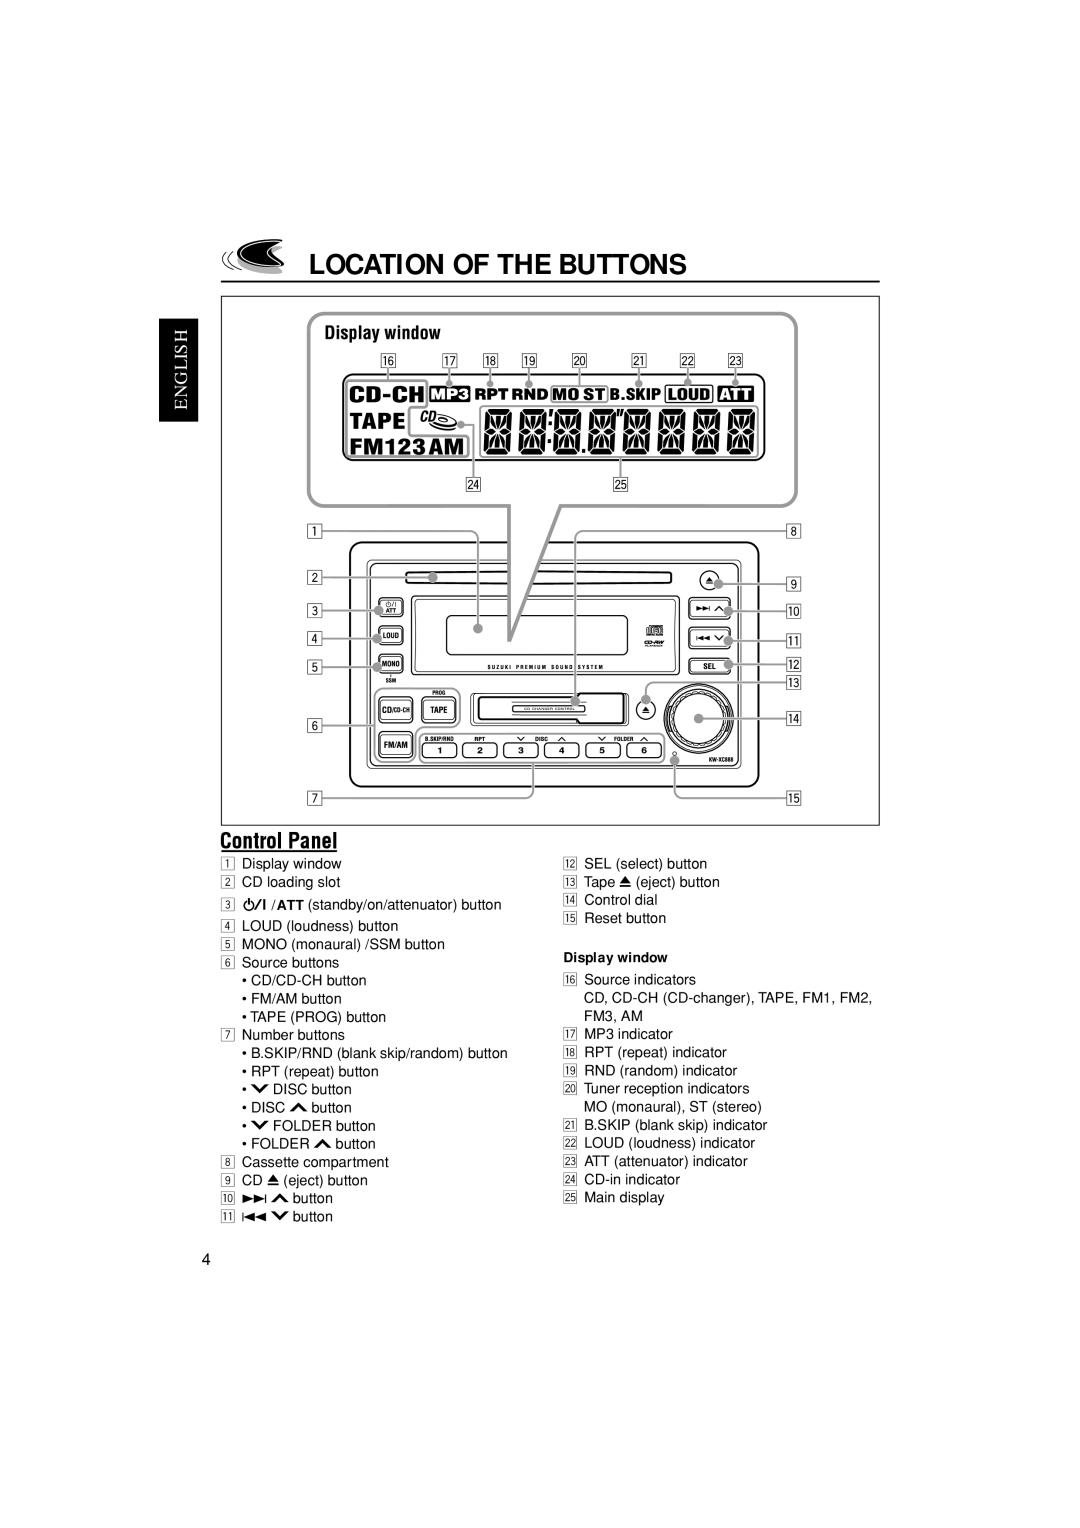 JVC LVT1139-002A, KW-XC888 manual Location of the Buttons, Display window, FM3, AM 